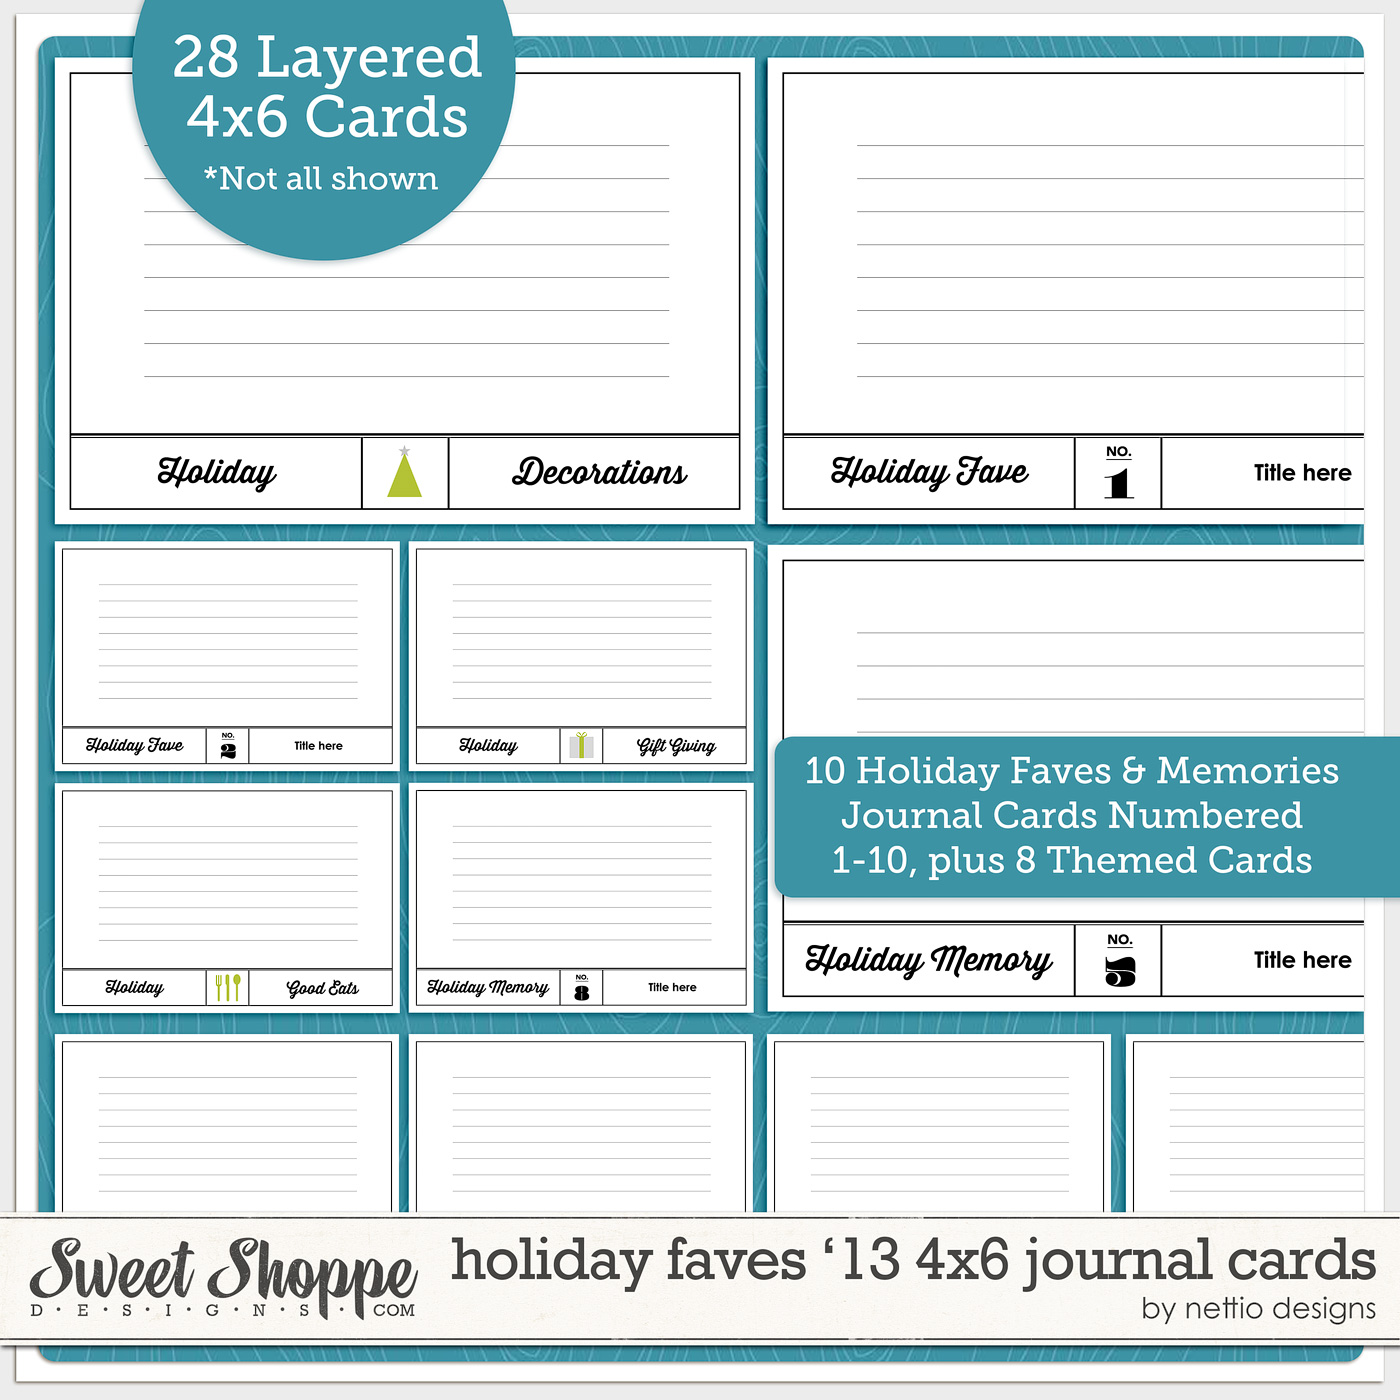 nettiodesigns_HolidayFaves13-4x6Cards-prev-1400